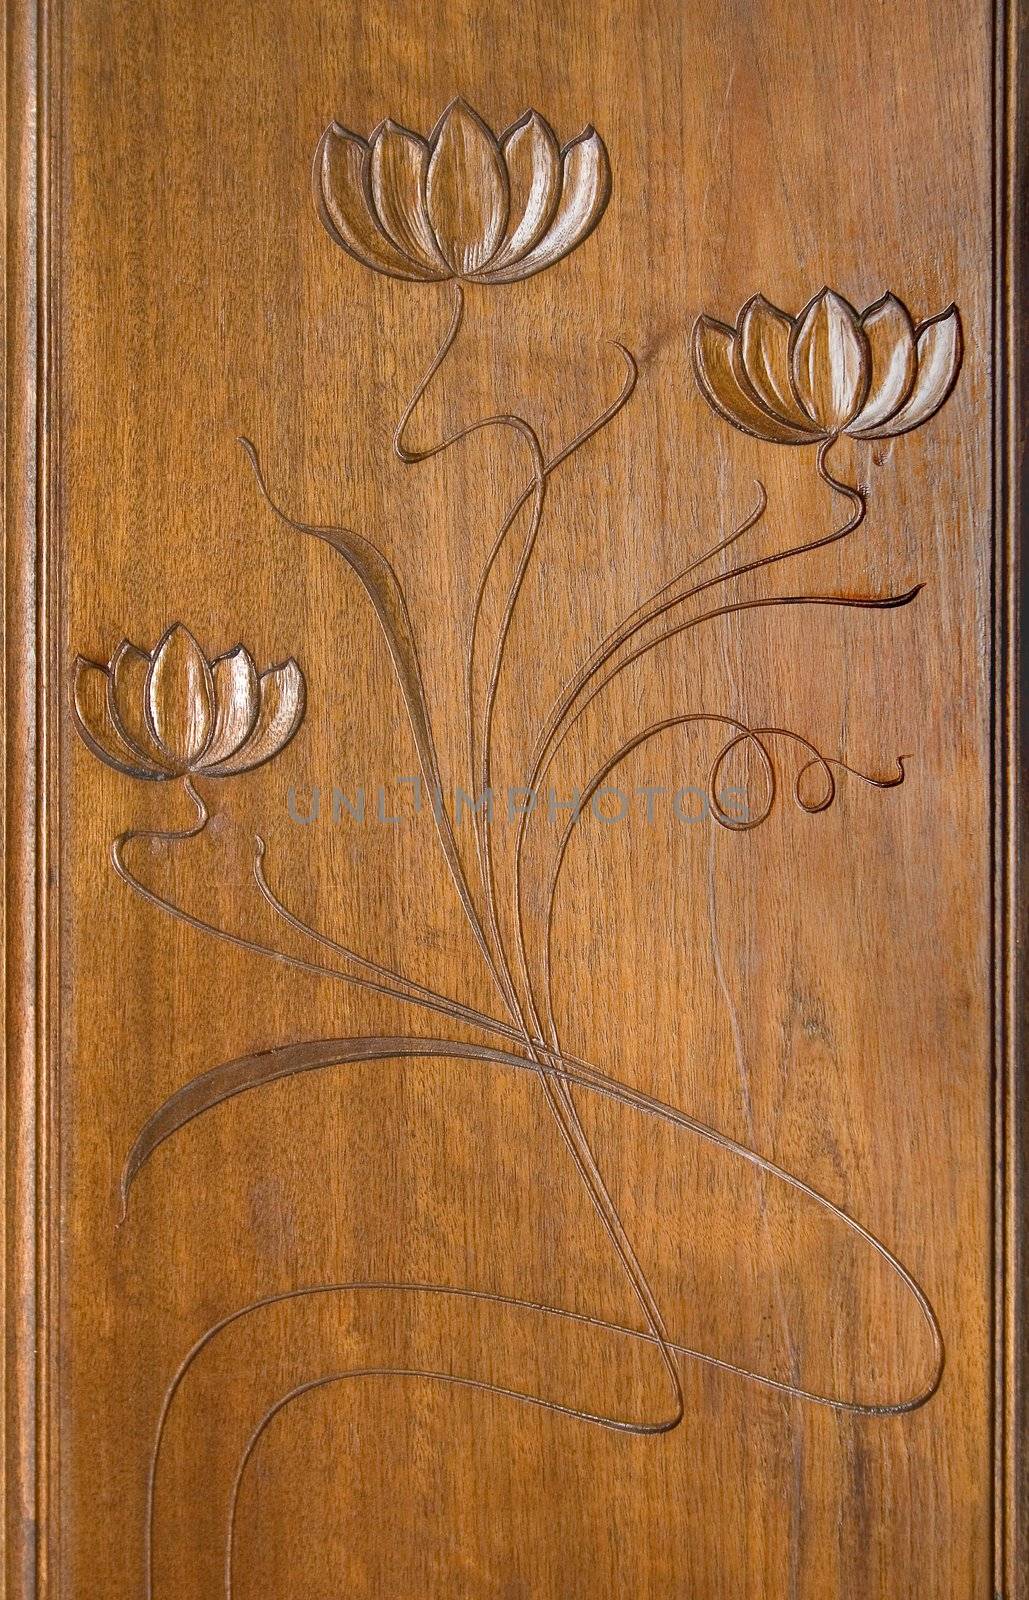 art deco carving decoration at wooden case 